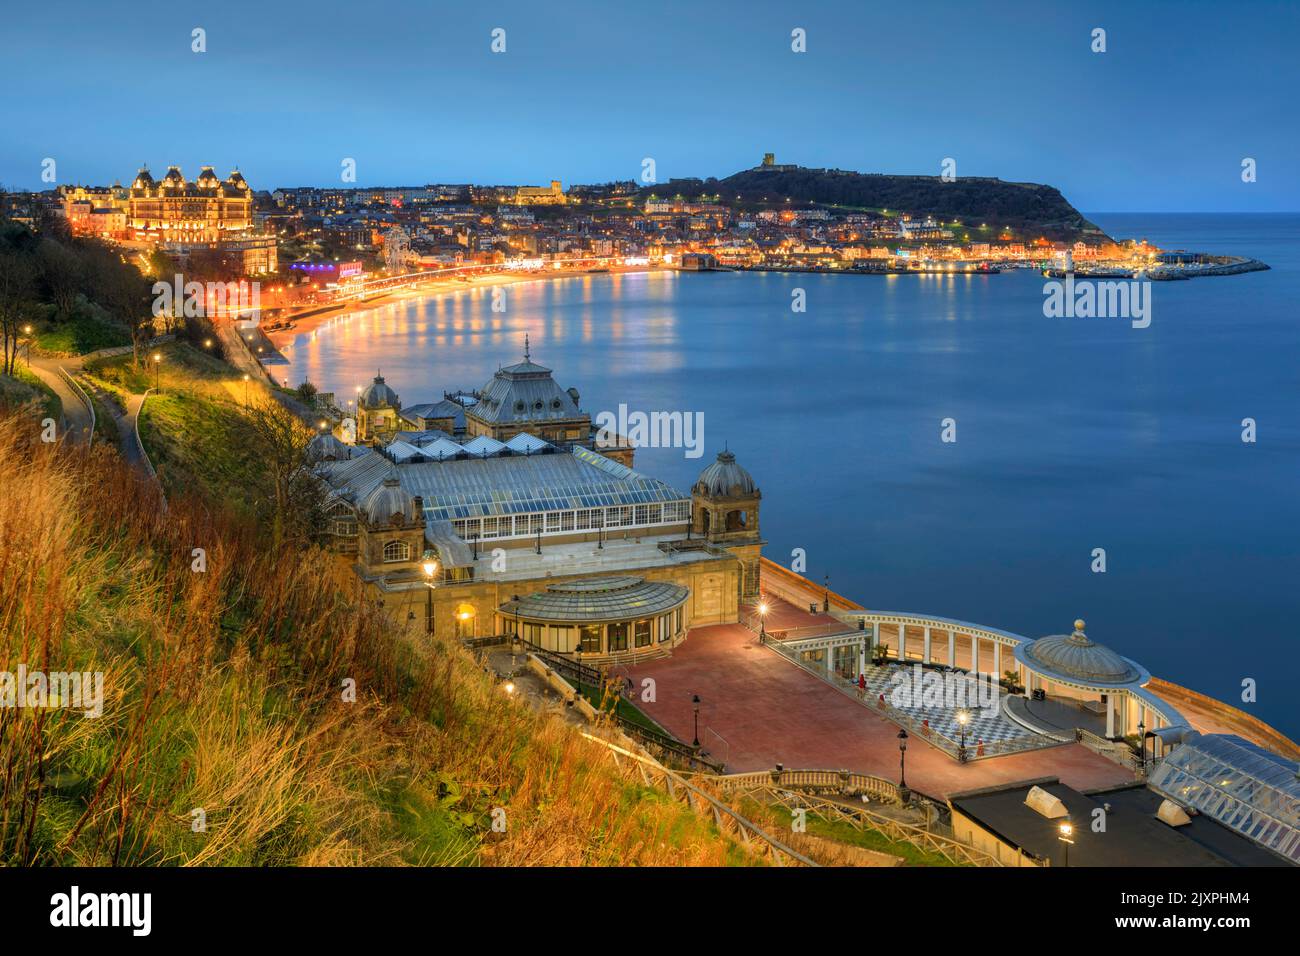 South Bay at Scarborough with the spa in the foreground captured during twilight on an evening in the spring. Stock Photo